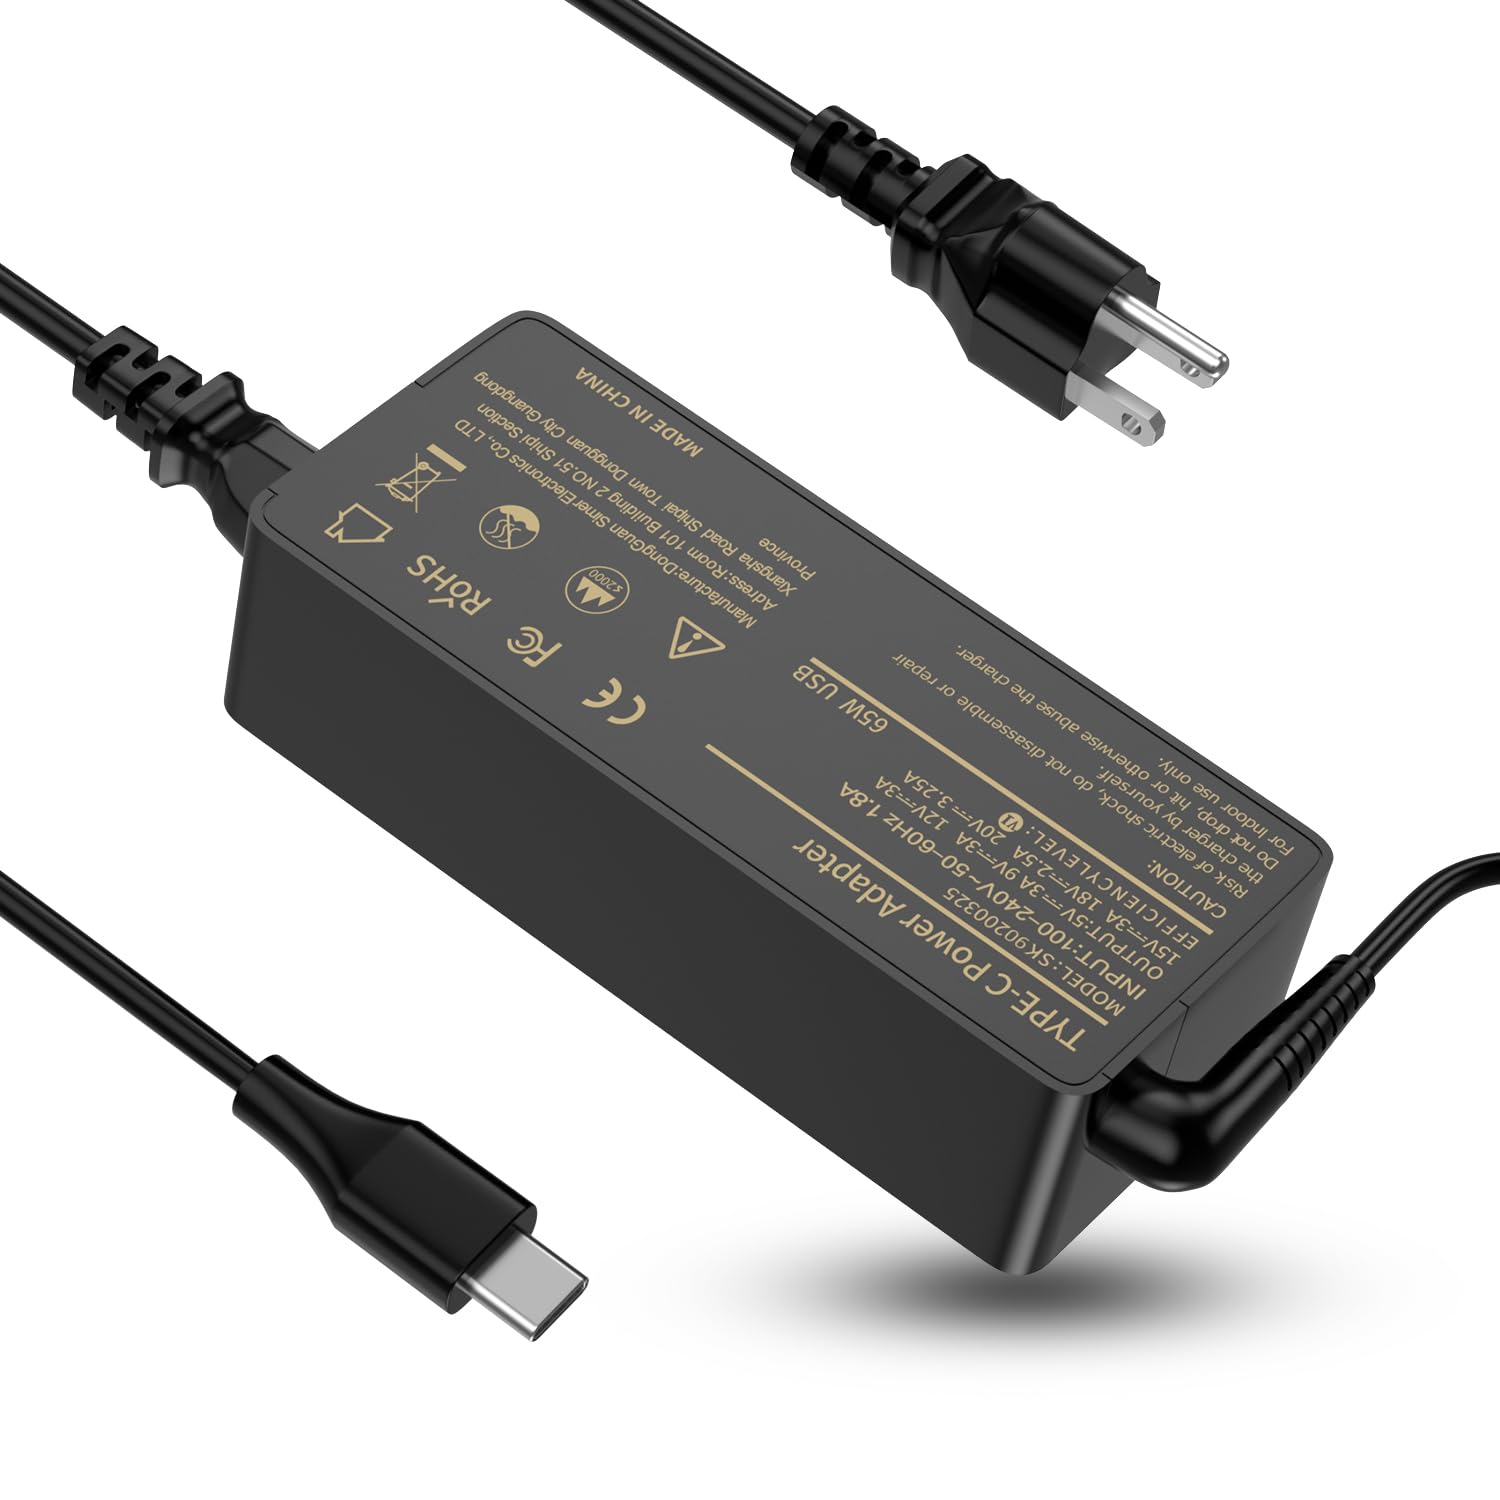 Universal 65W 45W USB-C Chromebook Charger: Type C Power Adapter Cord Compatible with Lenovo and Almost Any USB C Device